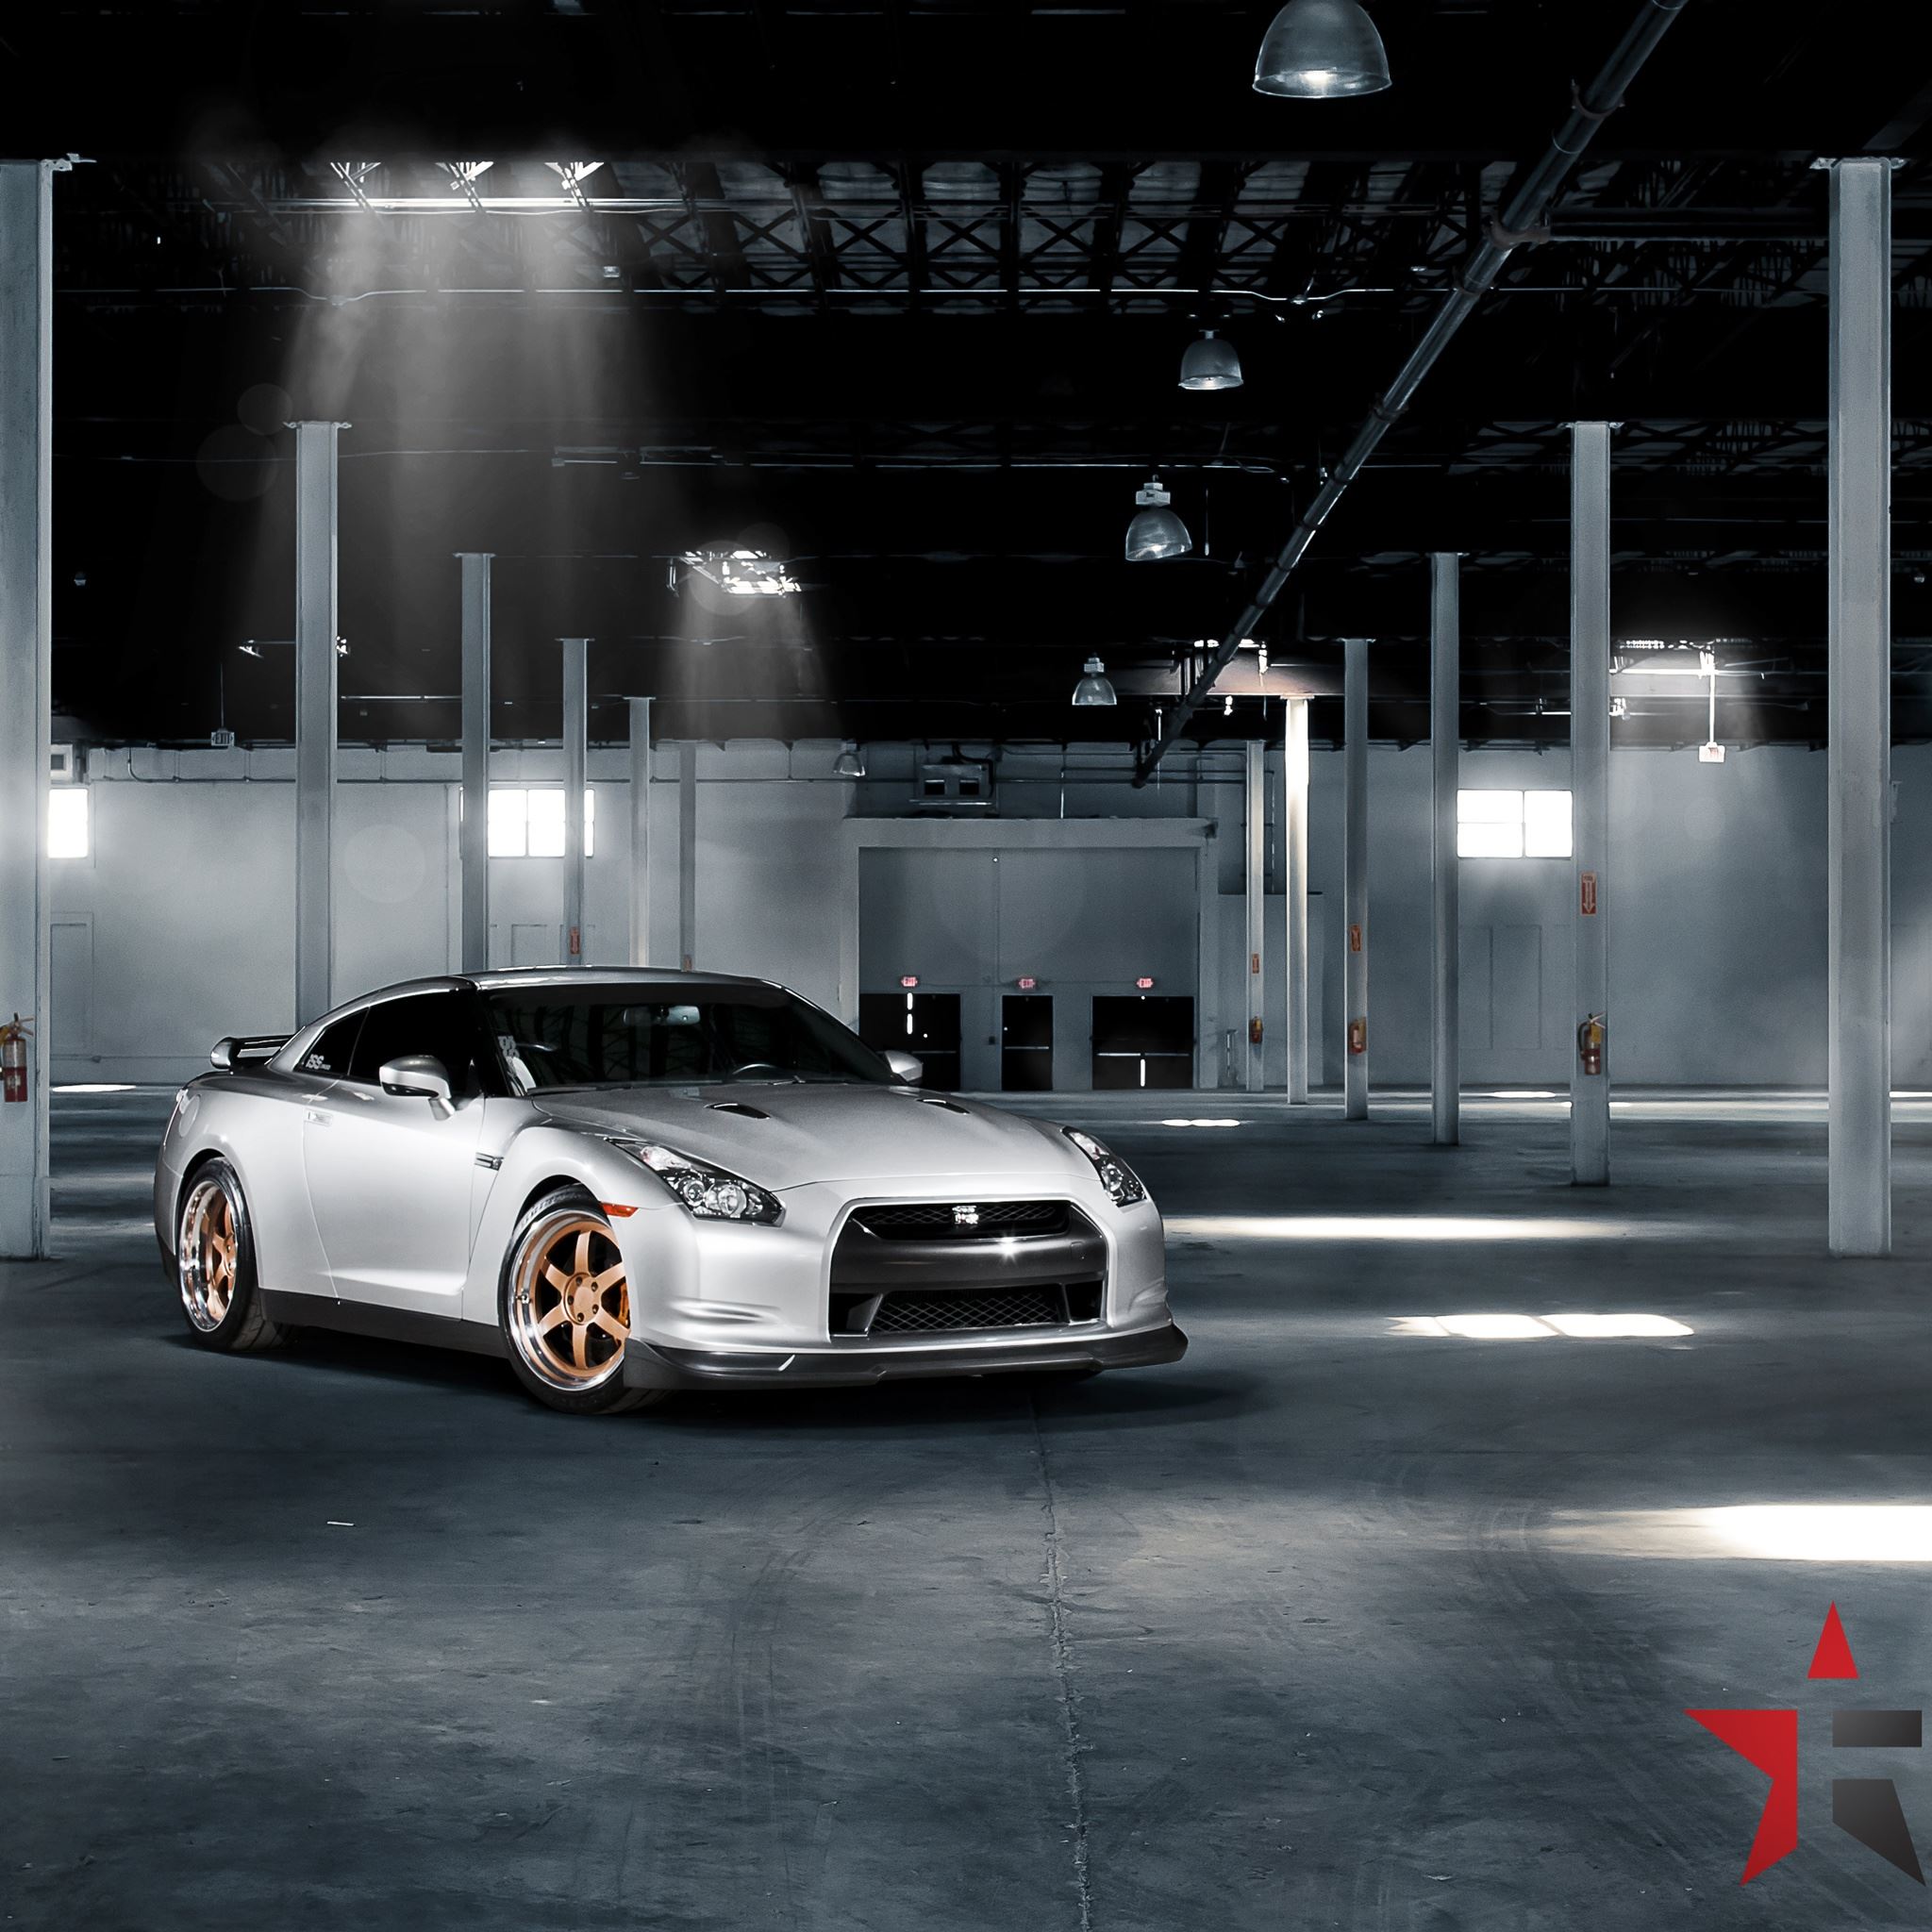 Fitment Factory Nissan Gtr The New Ipad 壁紙 日産 Iphone Androidスマホ壁紙 待ち受け画像まとめ Naver まとめ